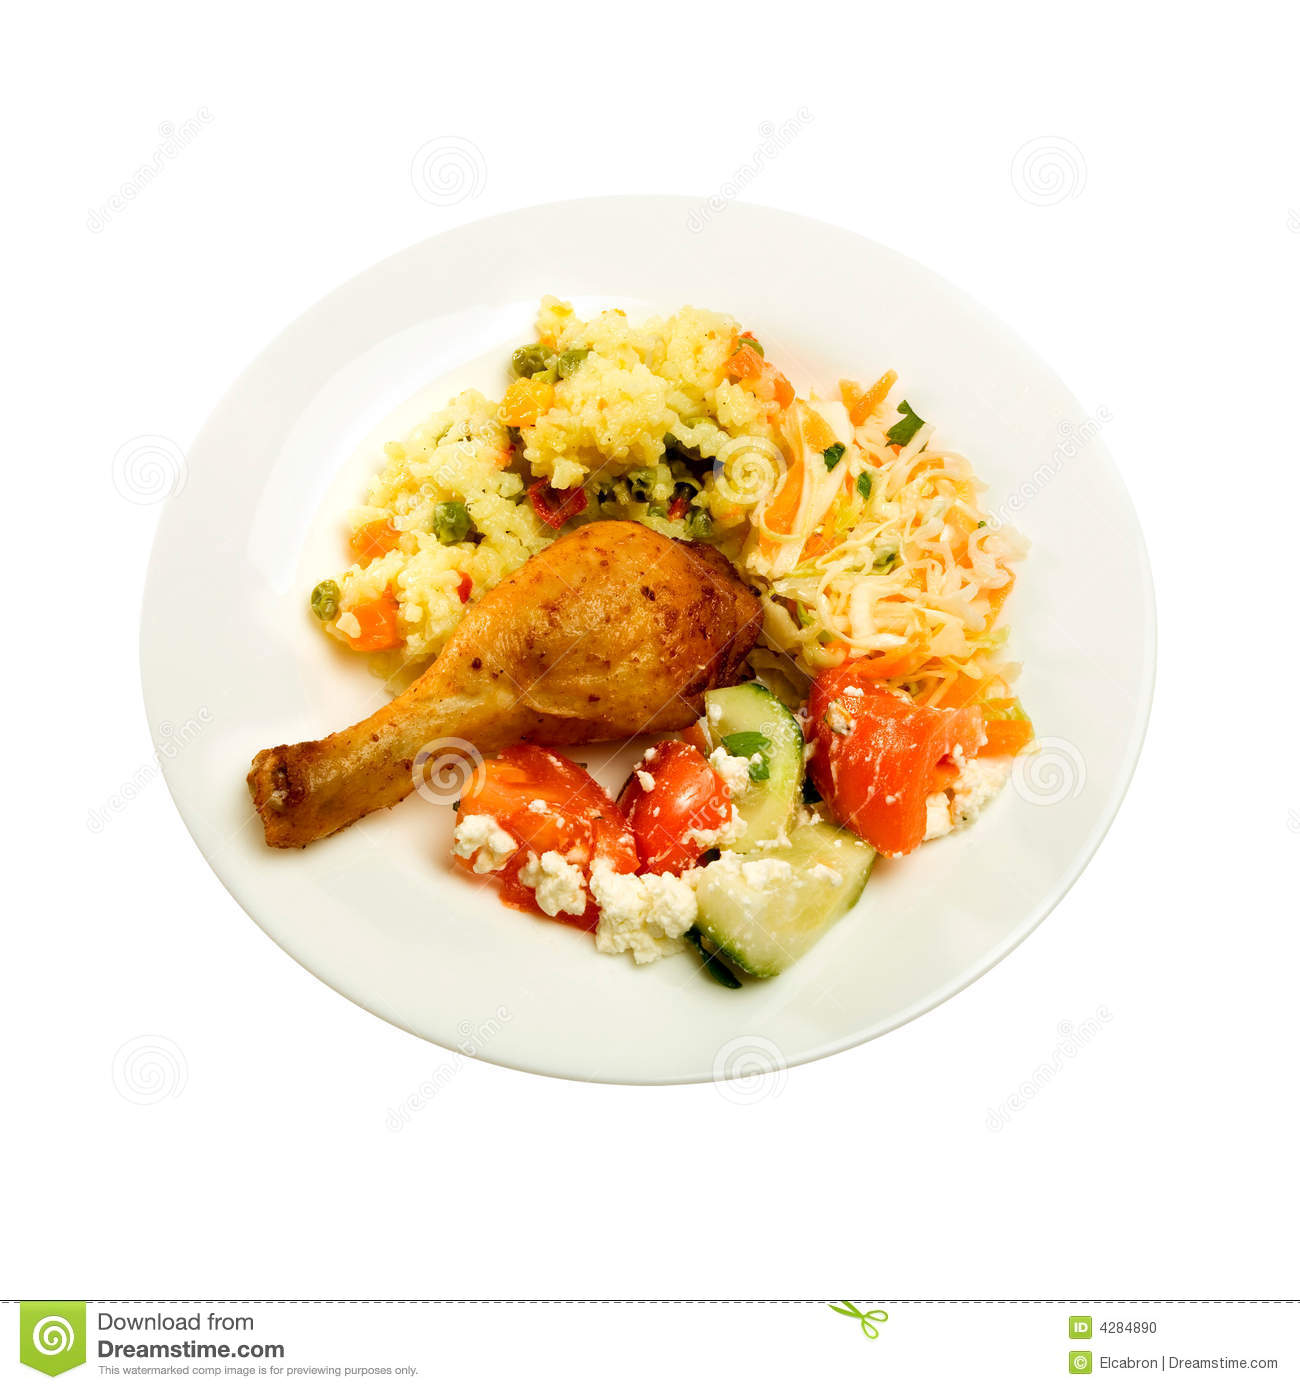 Baked Chicken With Salad Stock Photo   Image  4284890